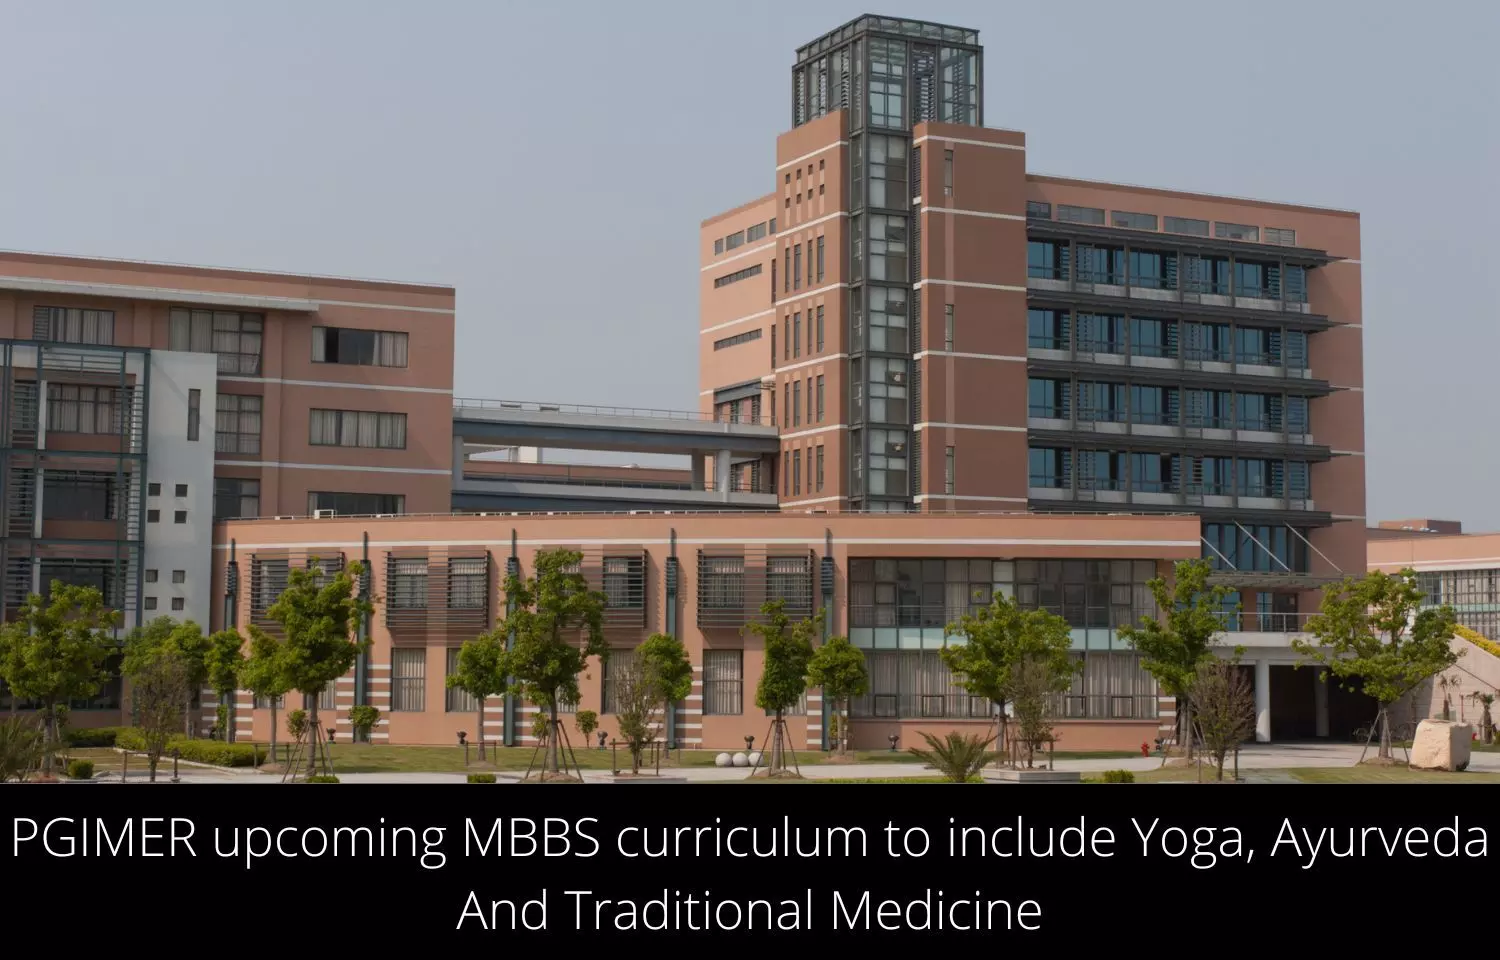 PGIMER MBBS curriculum to include Yoga, Ayurveda, and Traditional Medicine